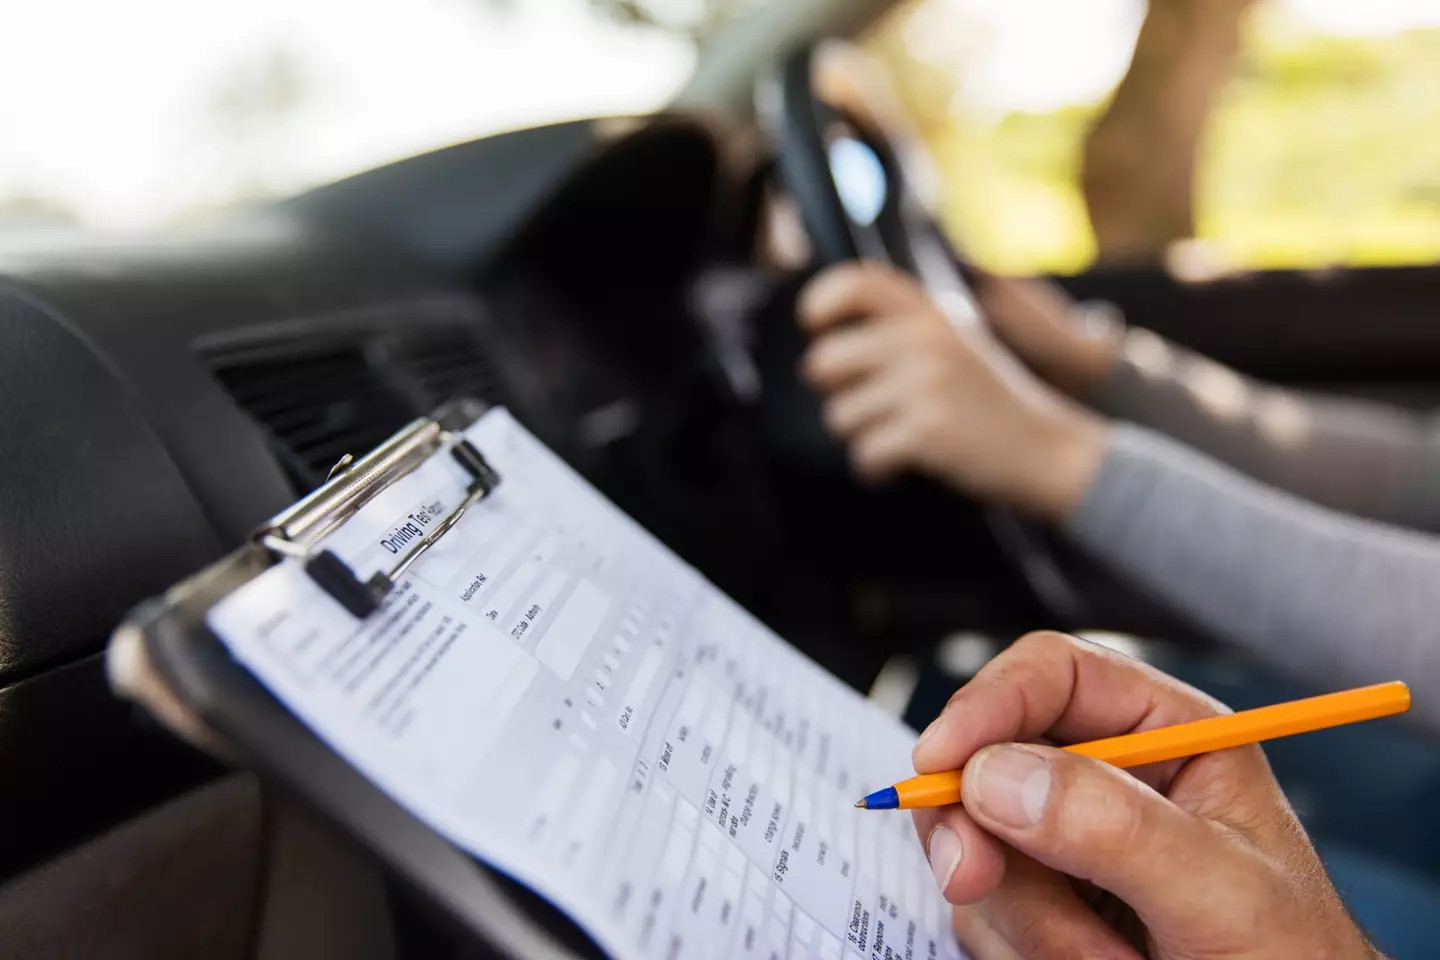 Driving test slots are being sold for five times the price online.